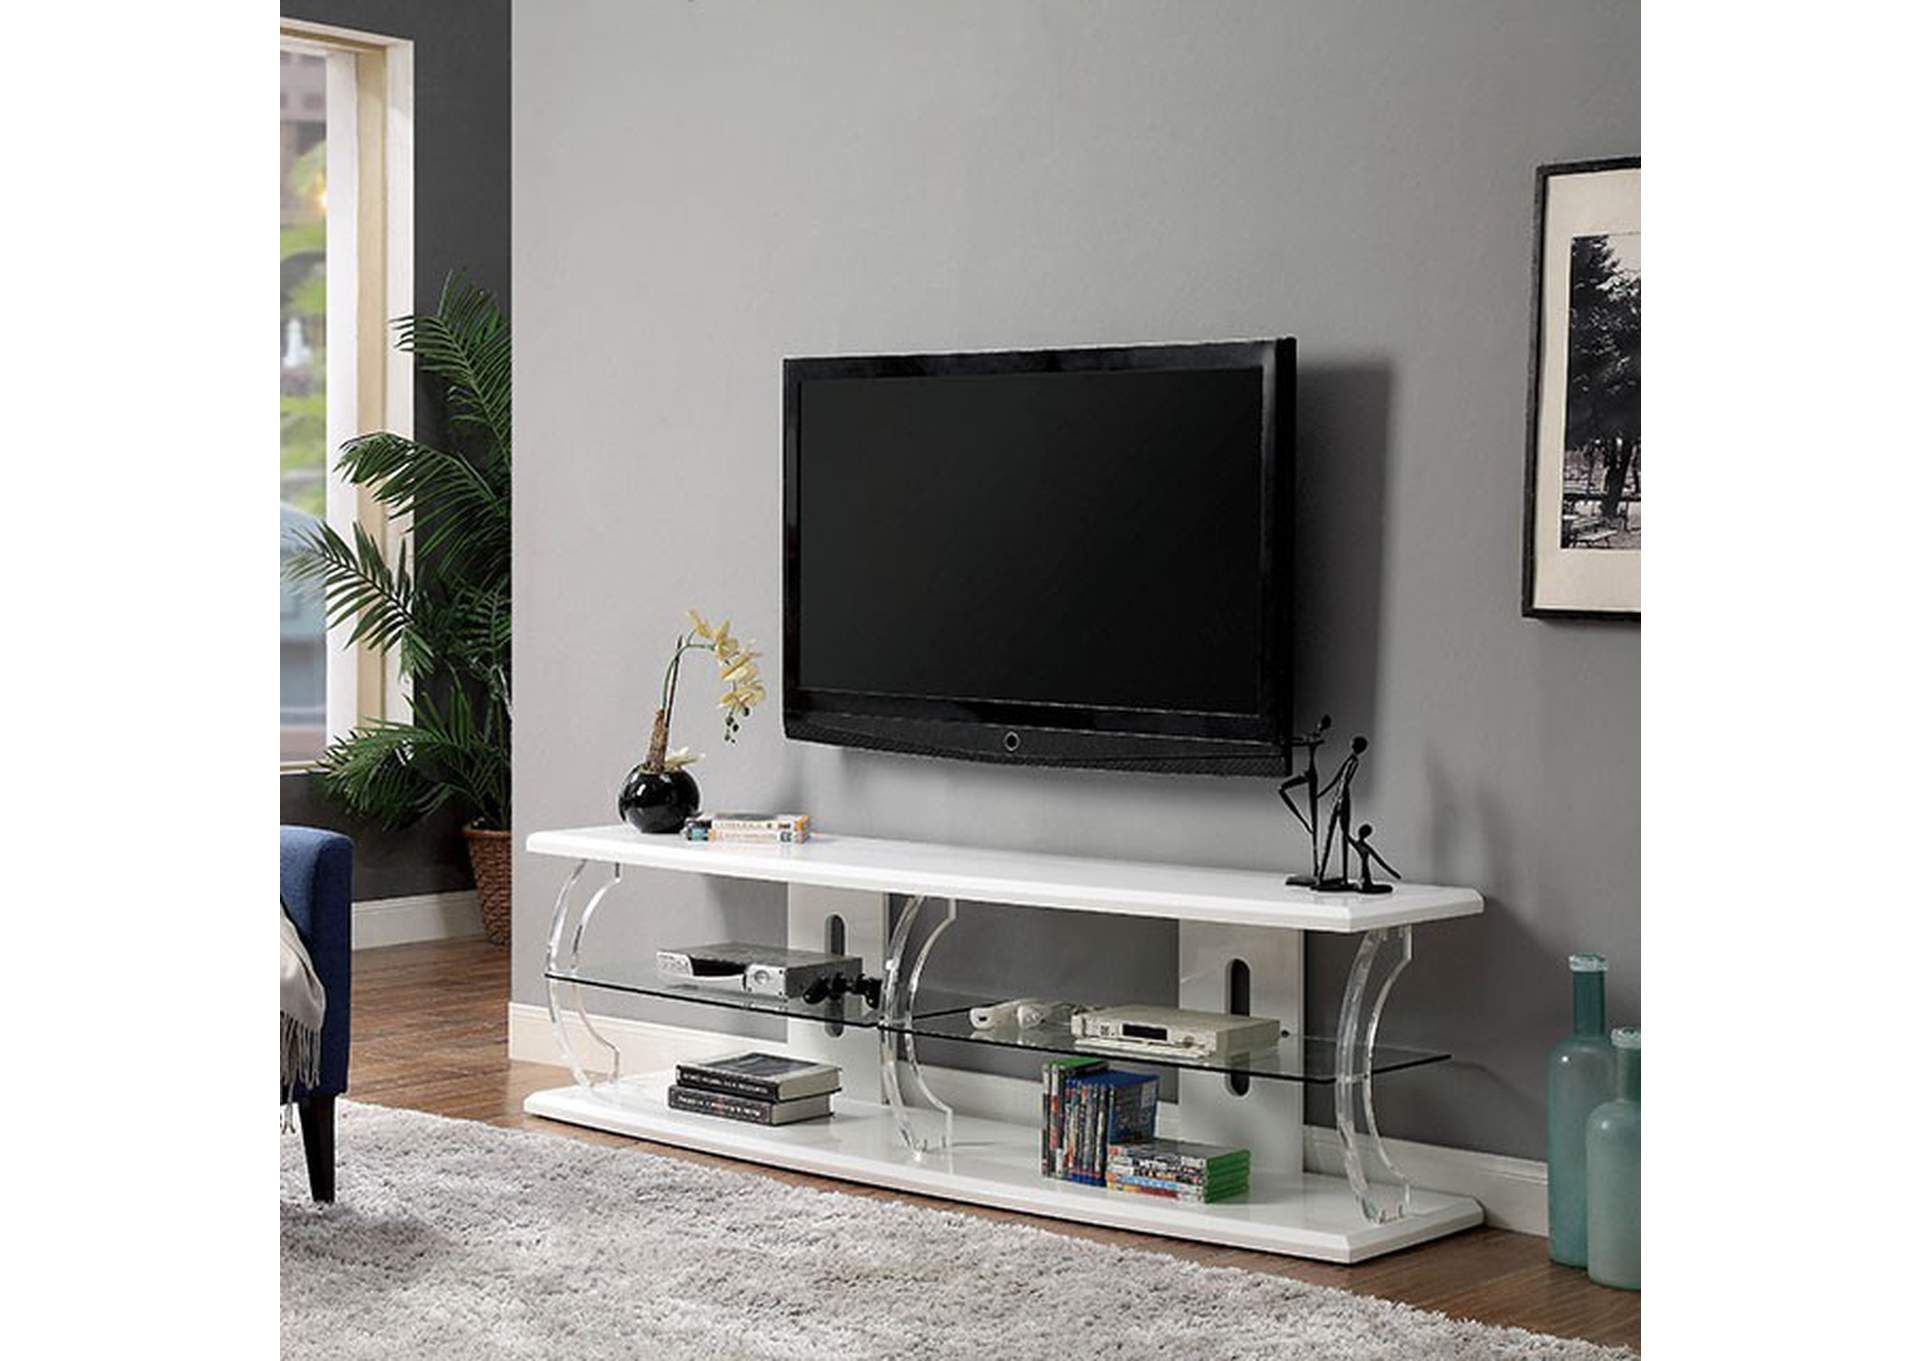 Ernst 60" Tv Stand Dimensional Furniture Outlet Pertaining To Led Tv Stands With Outlet (View 12 of 15)